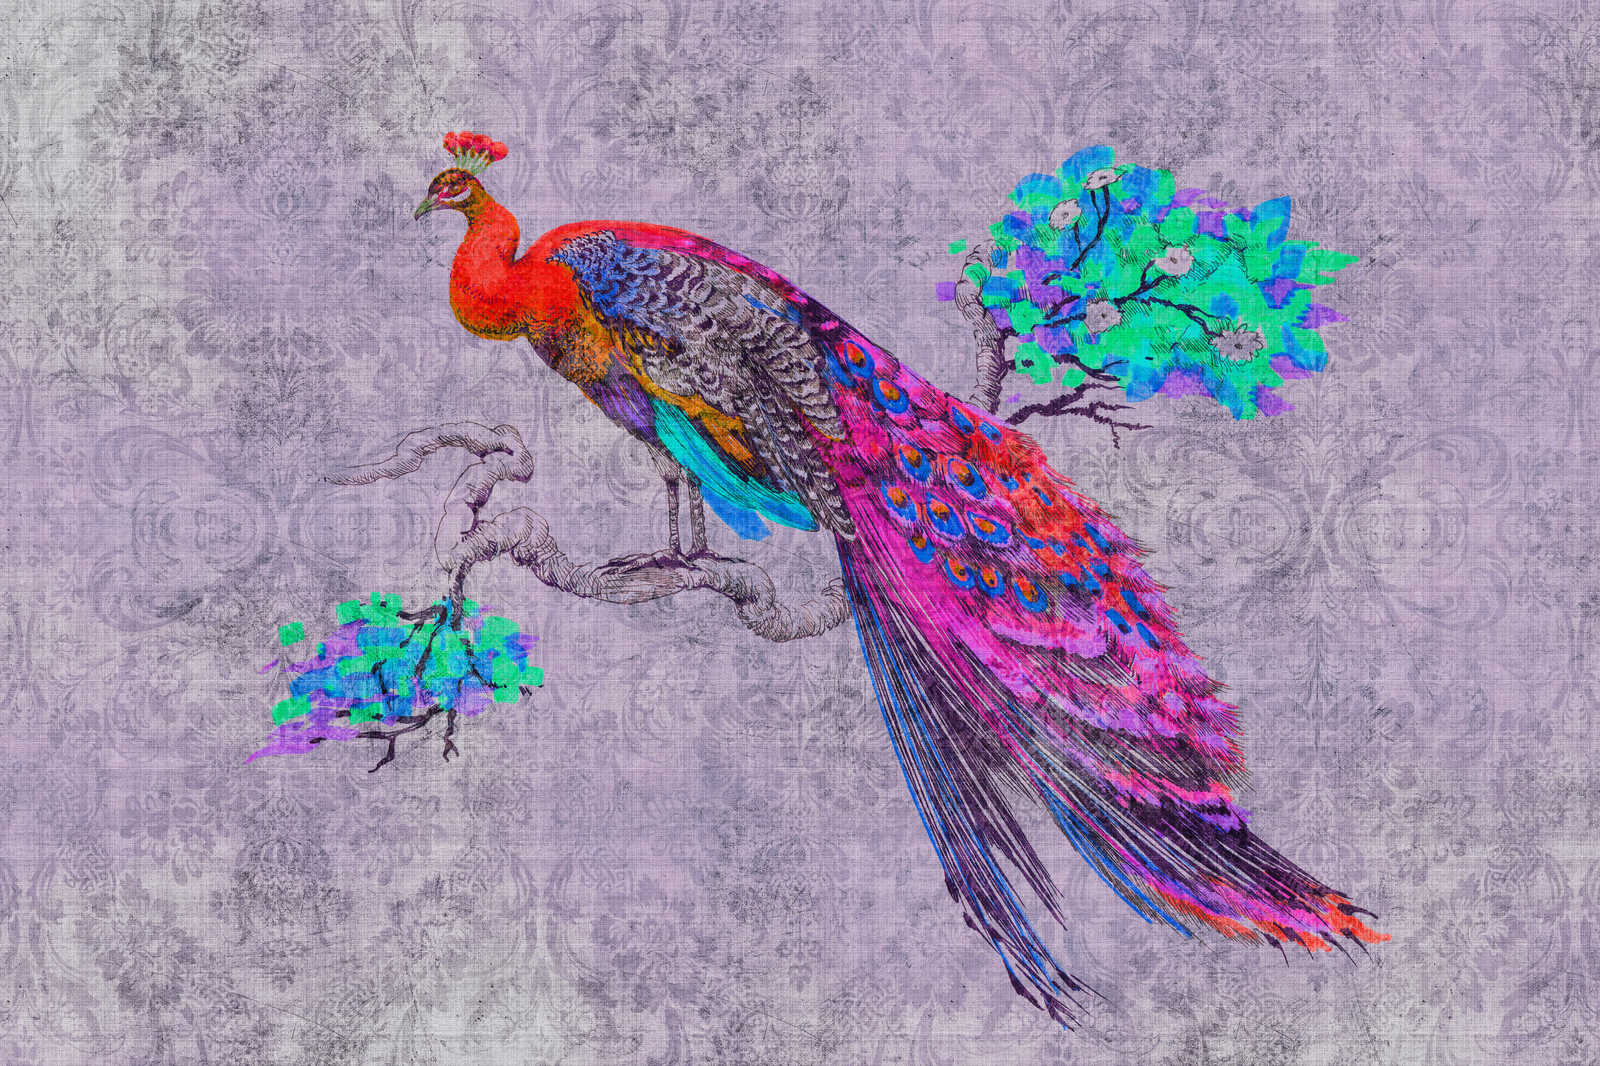             Peacock 3 - Canvas painting with colourful peacock - natural linen structure - 0.90 m x 0.60 m
        